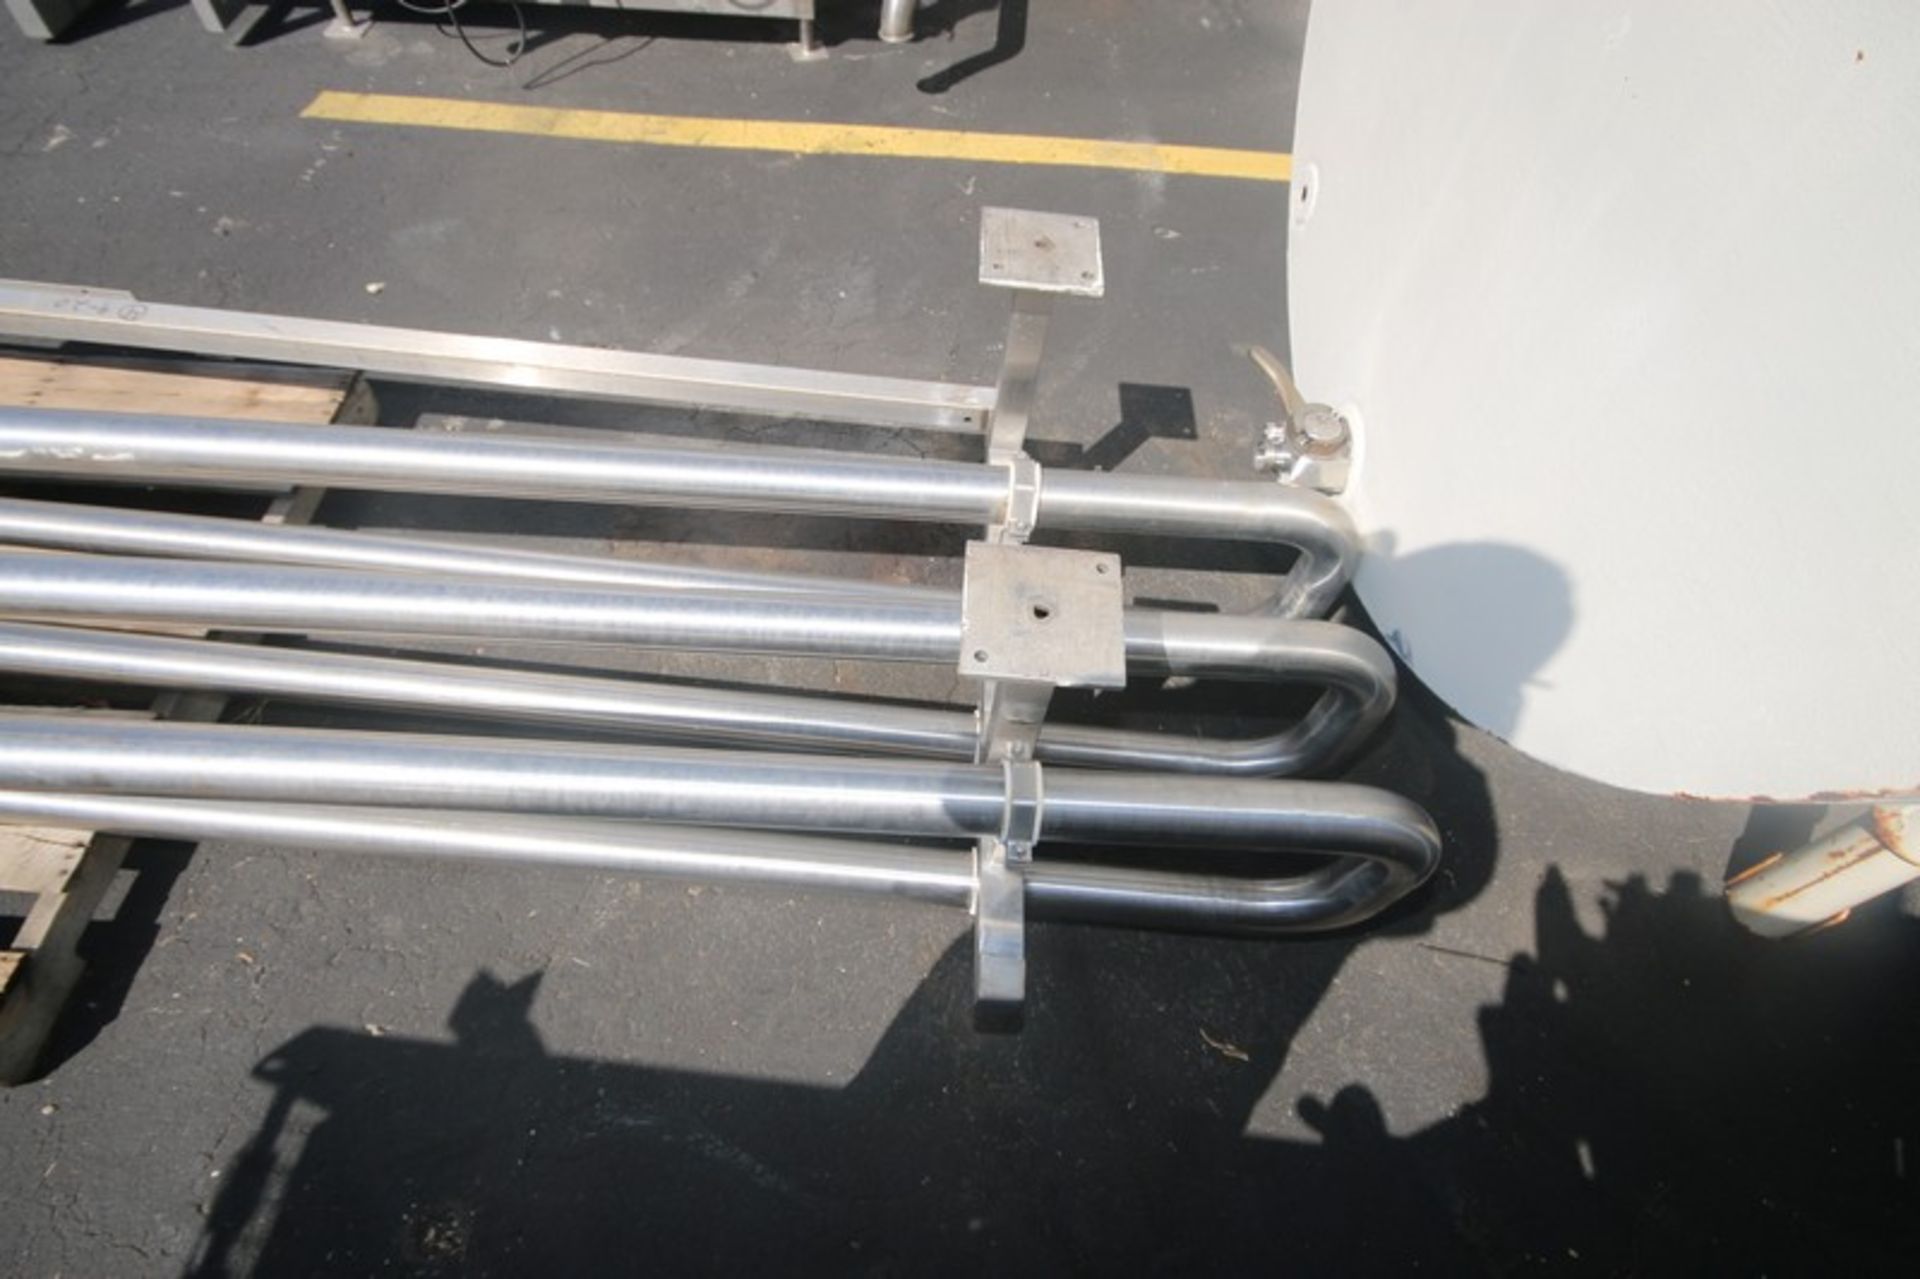 3-Pass 3" S/S Holding Tube,Aprox. 11' L, Mounted on S/S Frame (INV#69014)(LOCATED AT MDG AUCTION - Image 2 of 4